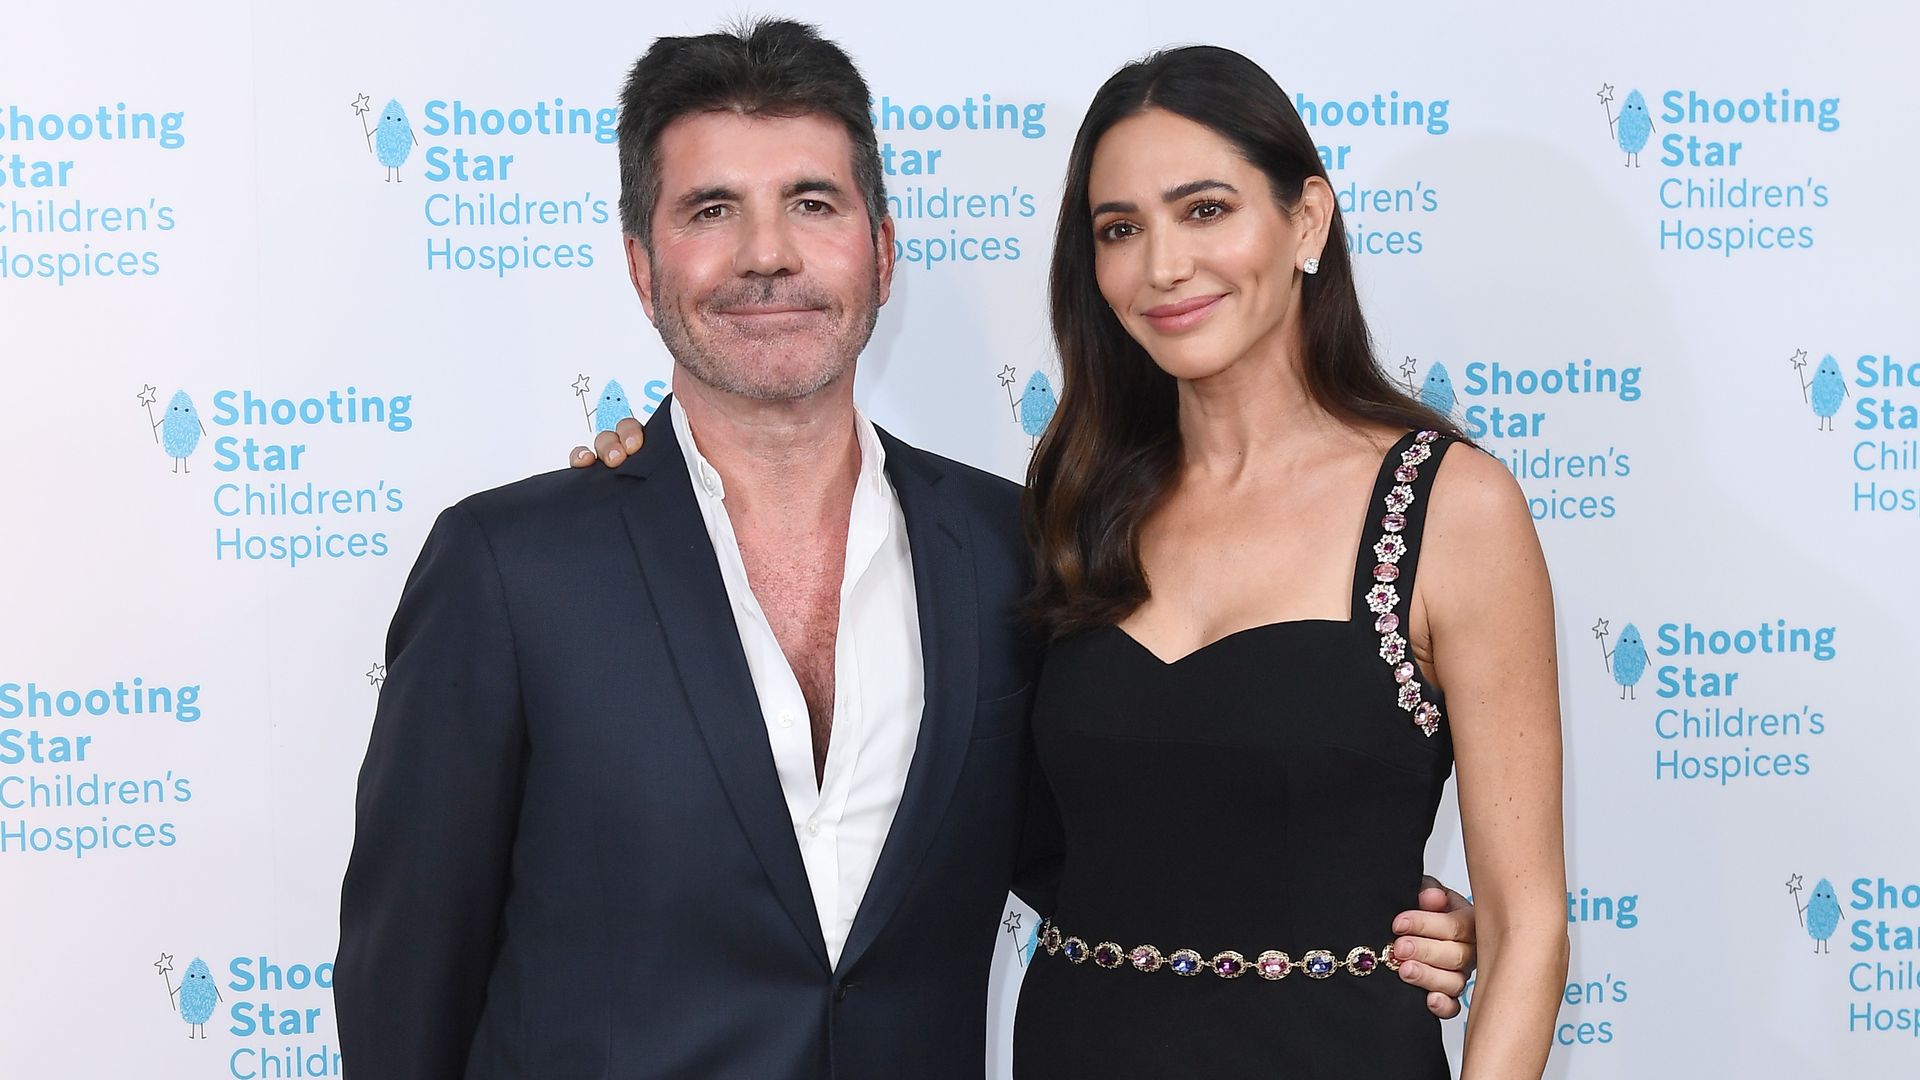 Simon Cowell and Lauren Silverman posing on a red carpet smiling